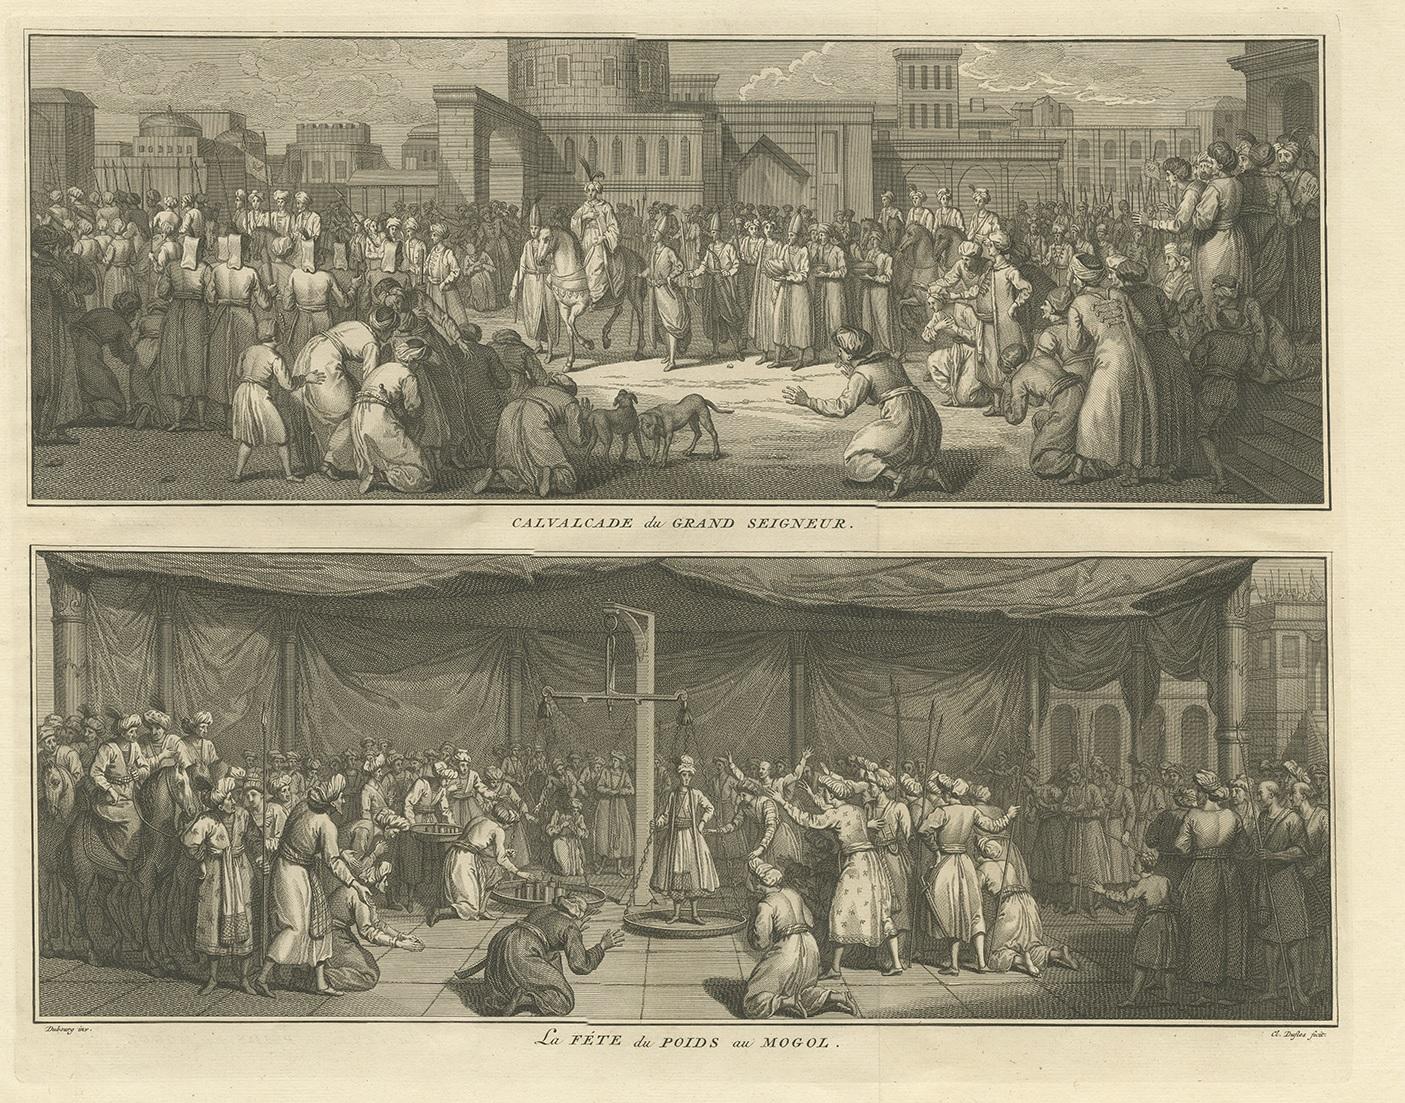 Antique print depicting depicts the Calvalcade of the Great Lord, the lower image depicts the celebration of the weights of the Mughal Empire. This print originates from 'Ceremonies et coutumes Religieuses' by A. Moubach.